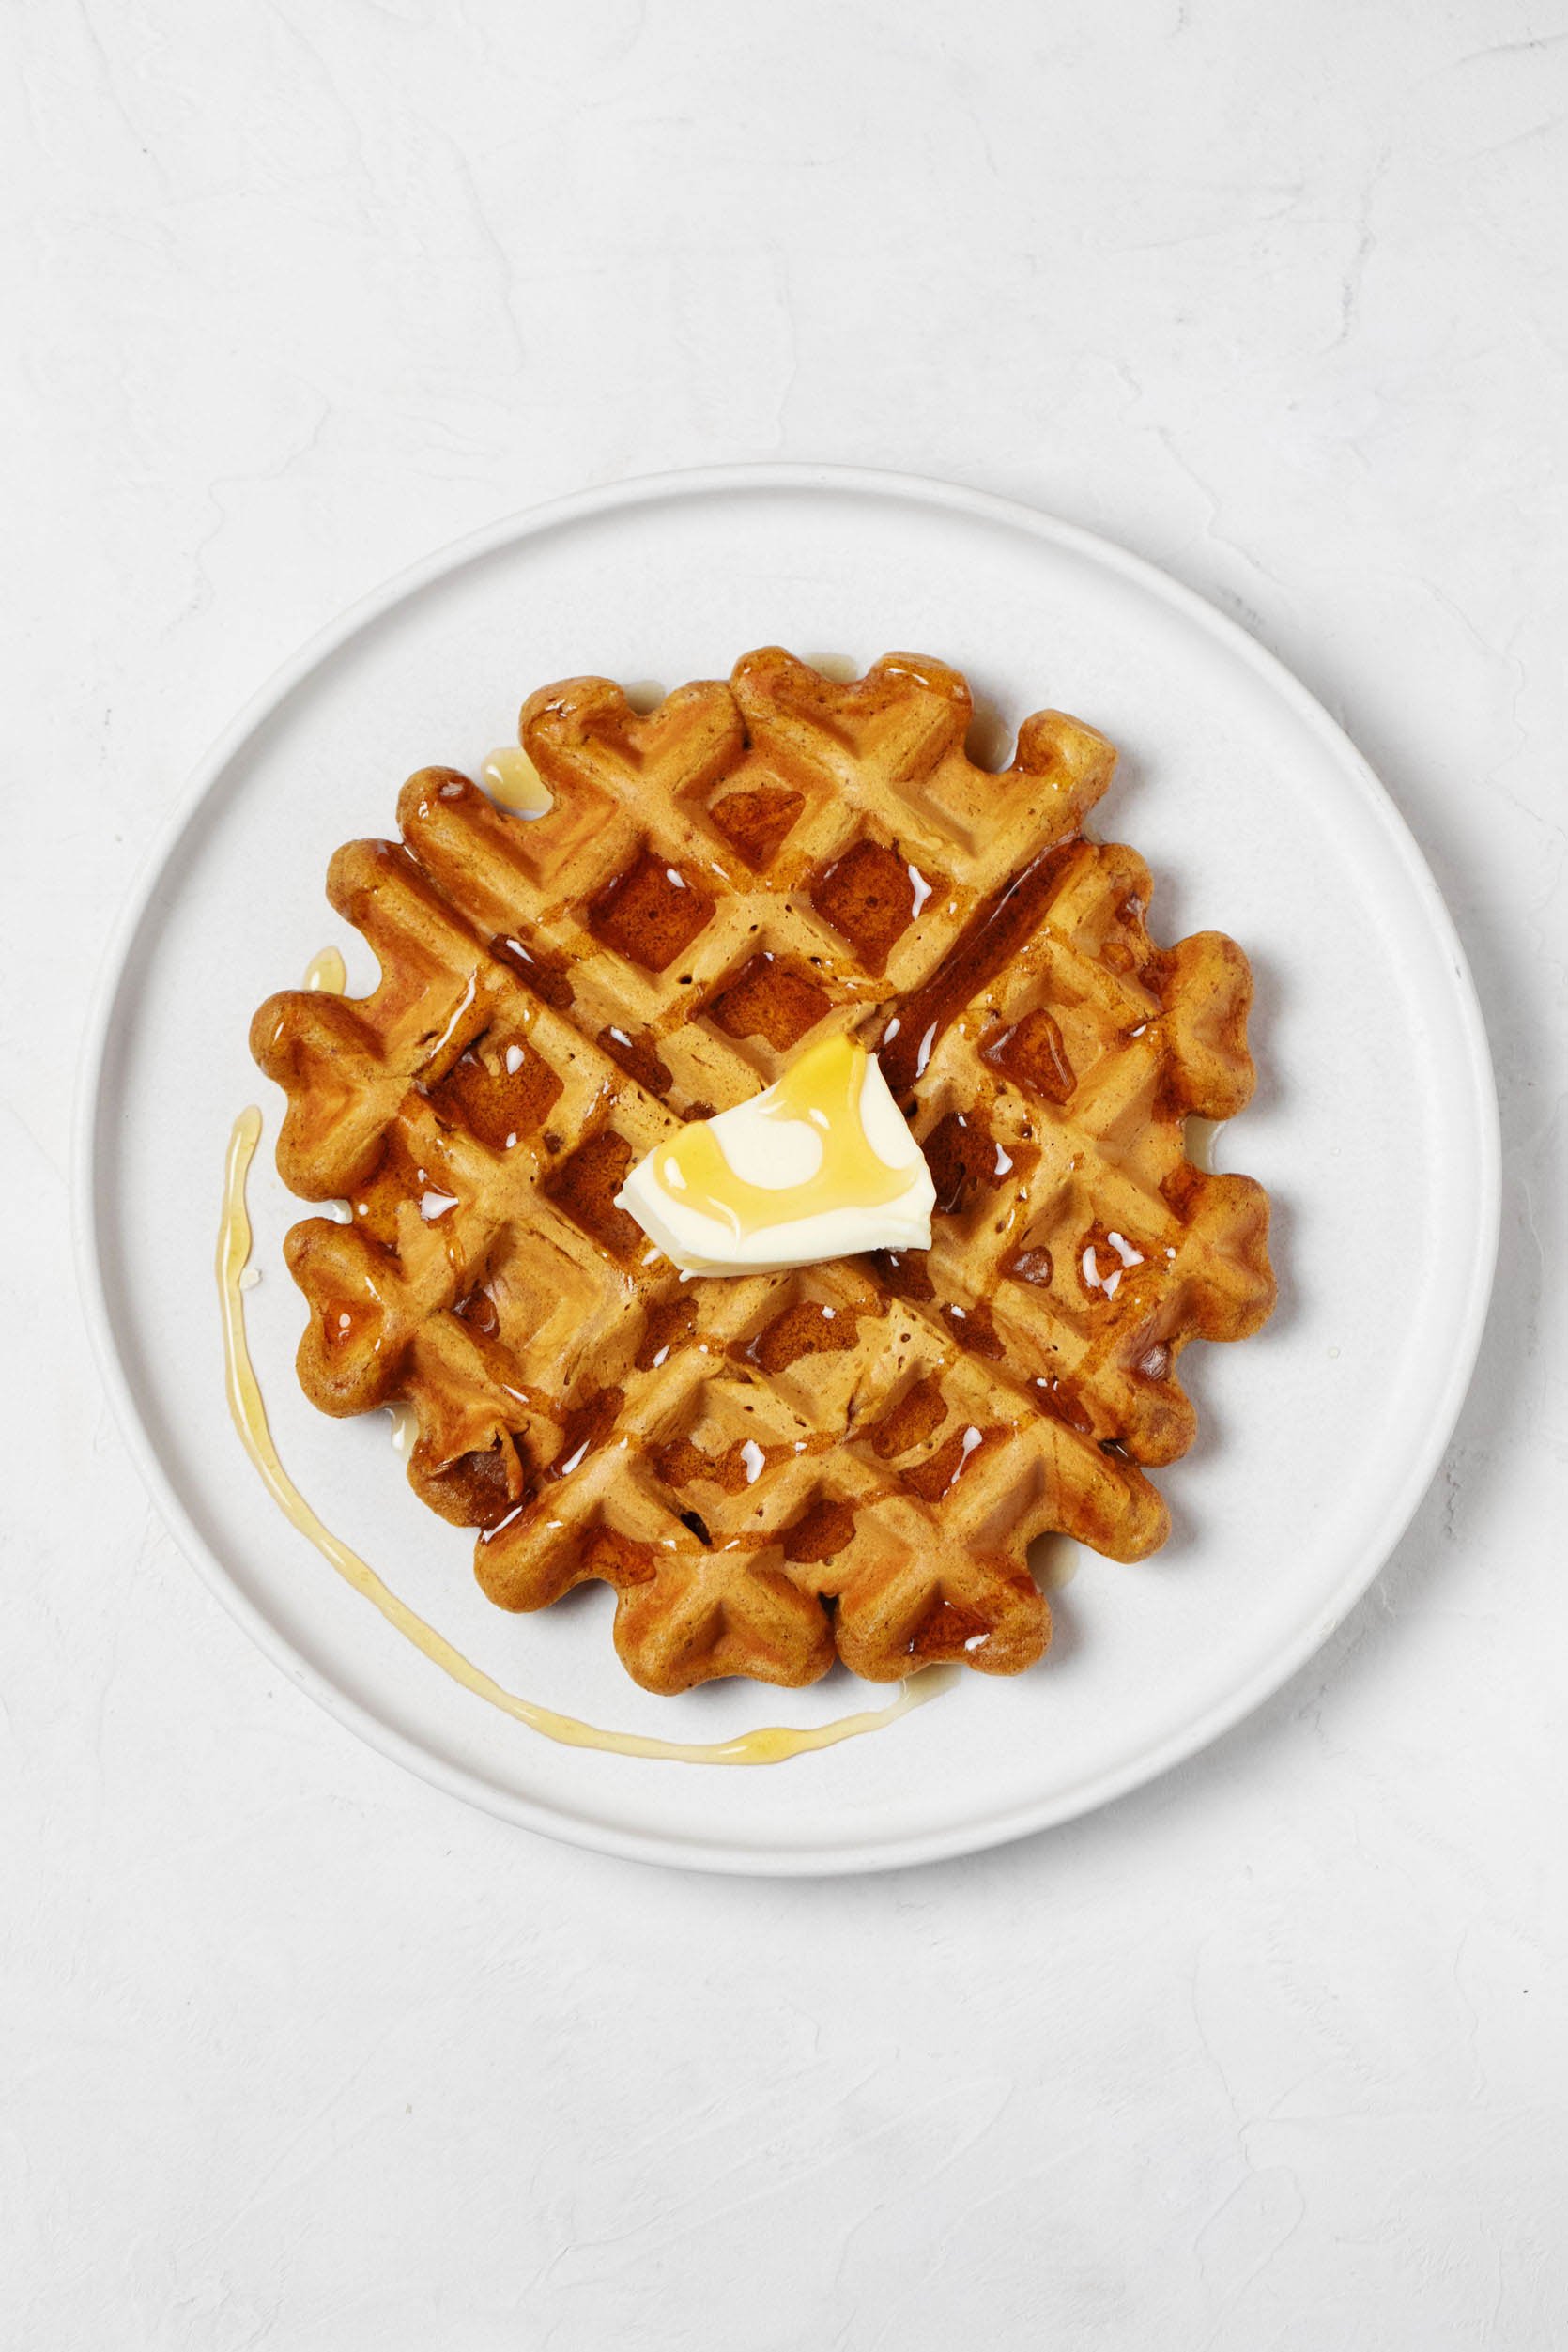 10 Things to Know Before Buying A Dash Mini Waffle Maker - Drizzle Me  Skinny!